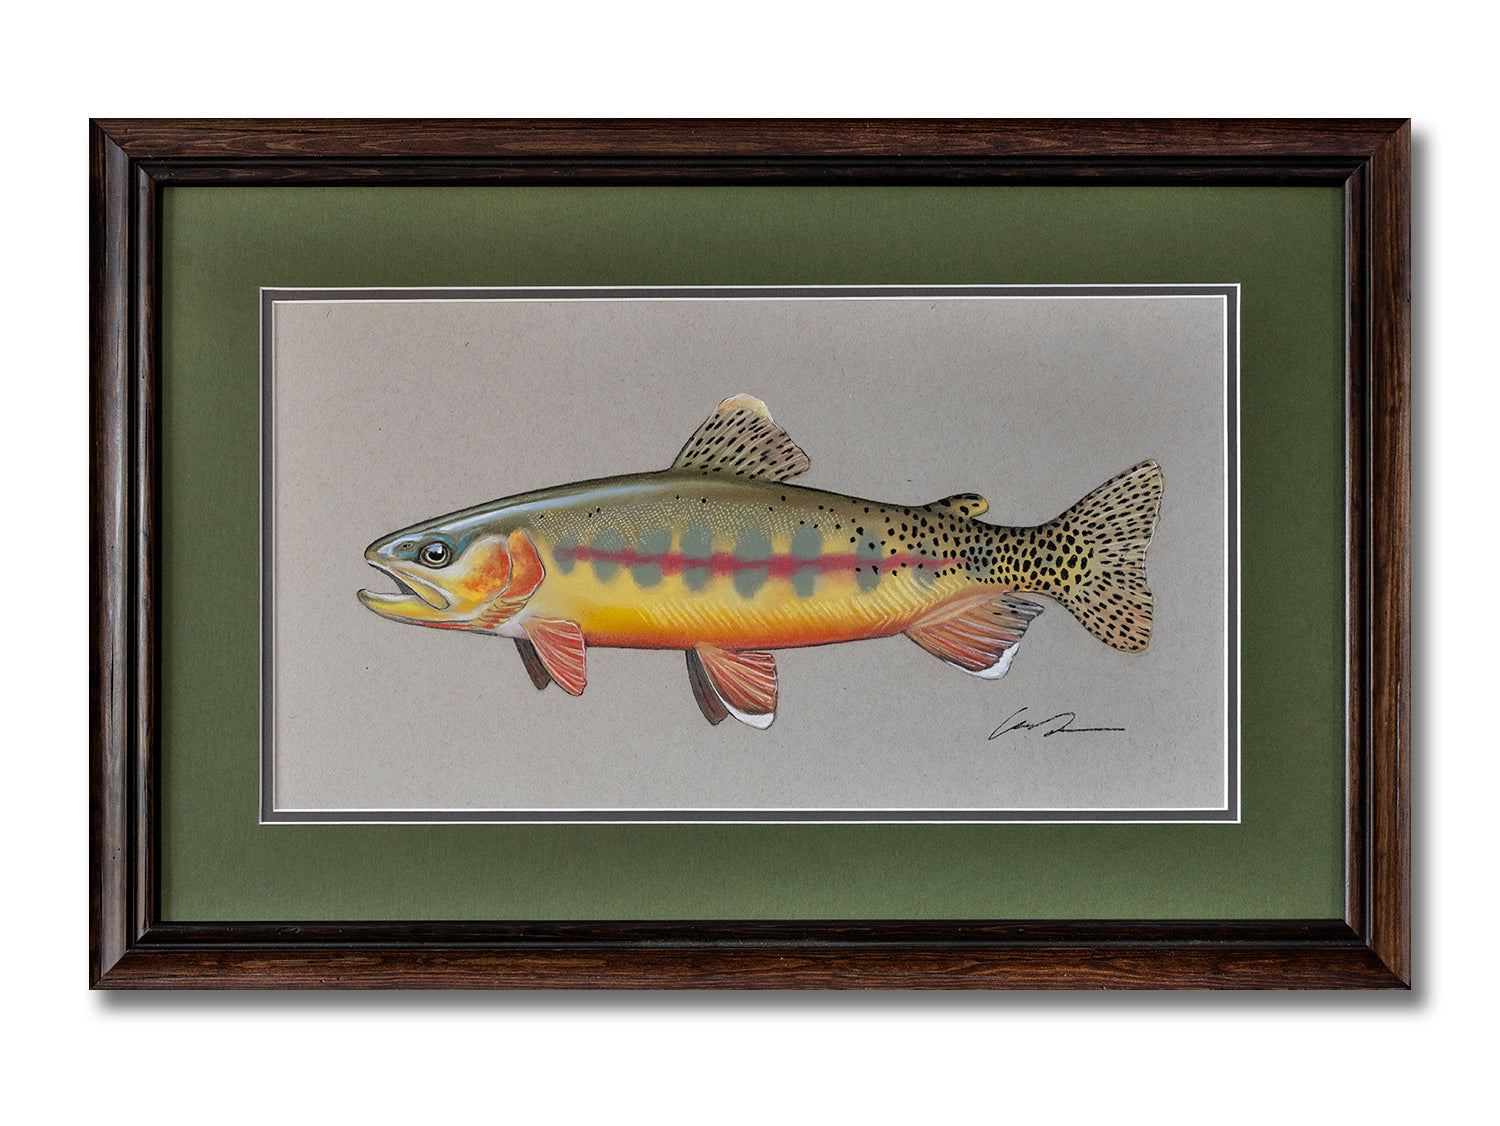 A pastel drawing of a Golden Trout on toned gray paper. Framed with wooden frame and green mat.